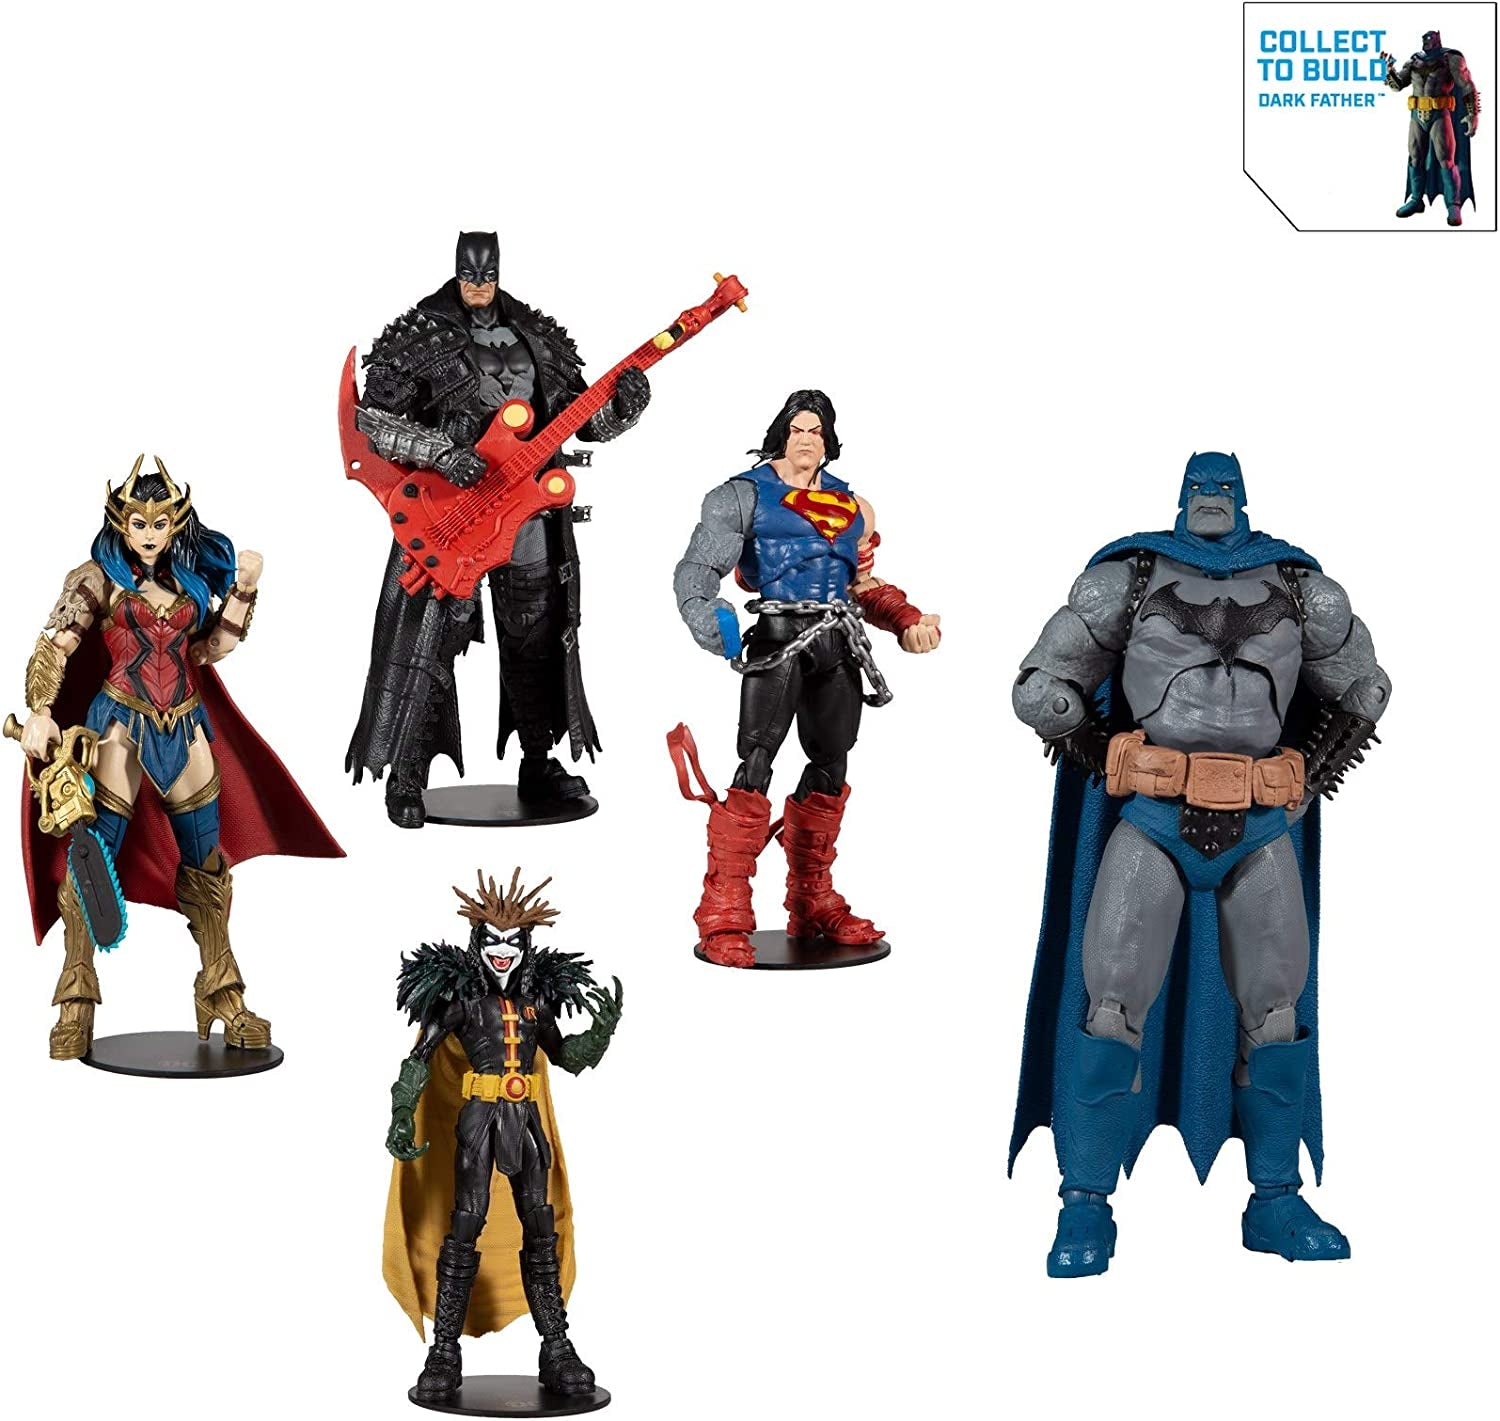 DC Multiverse Dark Nights: Death Metal Wonder Woman 7" Action Figure with Build-A ‘Darkfather’ Parts and Accessories